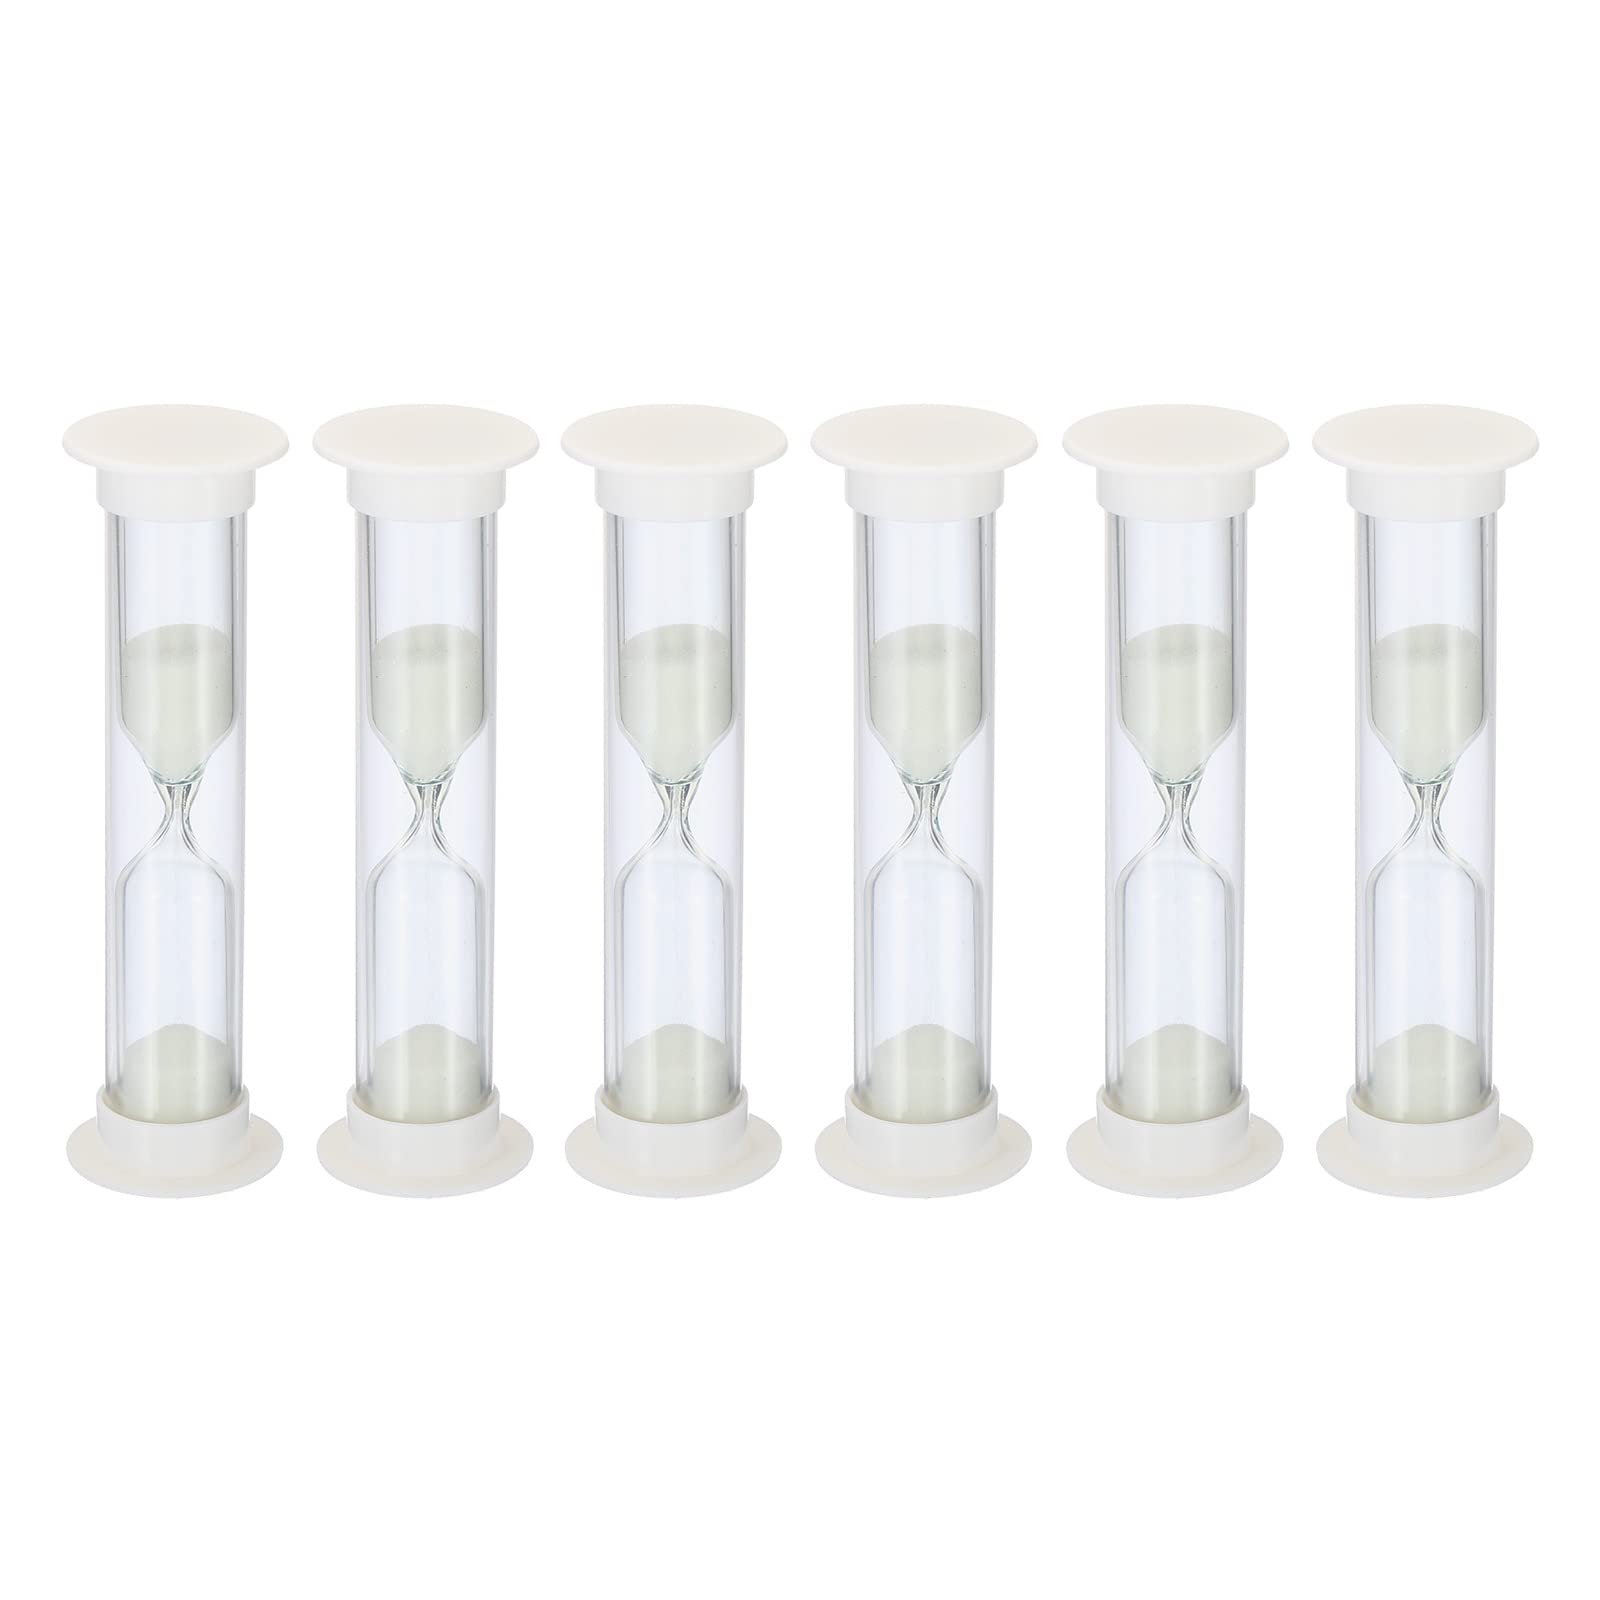 PATIKIL 2 Minute Sand Timer, 6Pcs Small Sandy Clock with Plastic Cover, Count Down Sand Glass for Games, Kitchen, Party Favors DIY Decoration, White